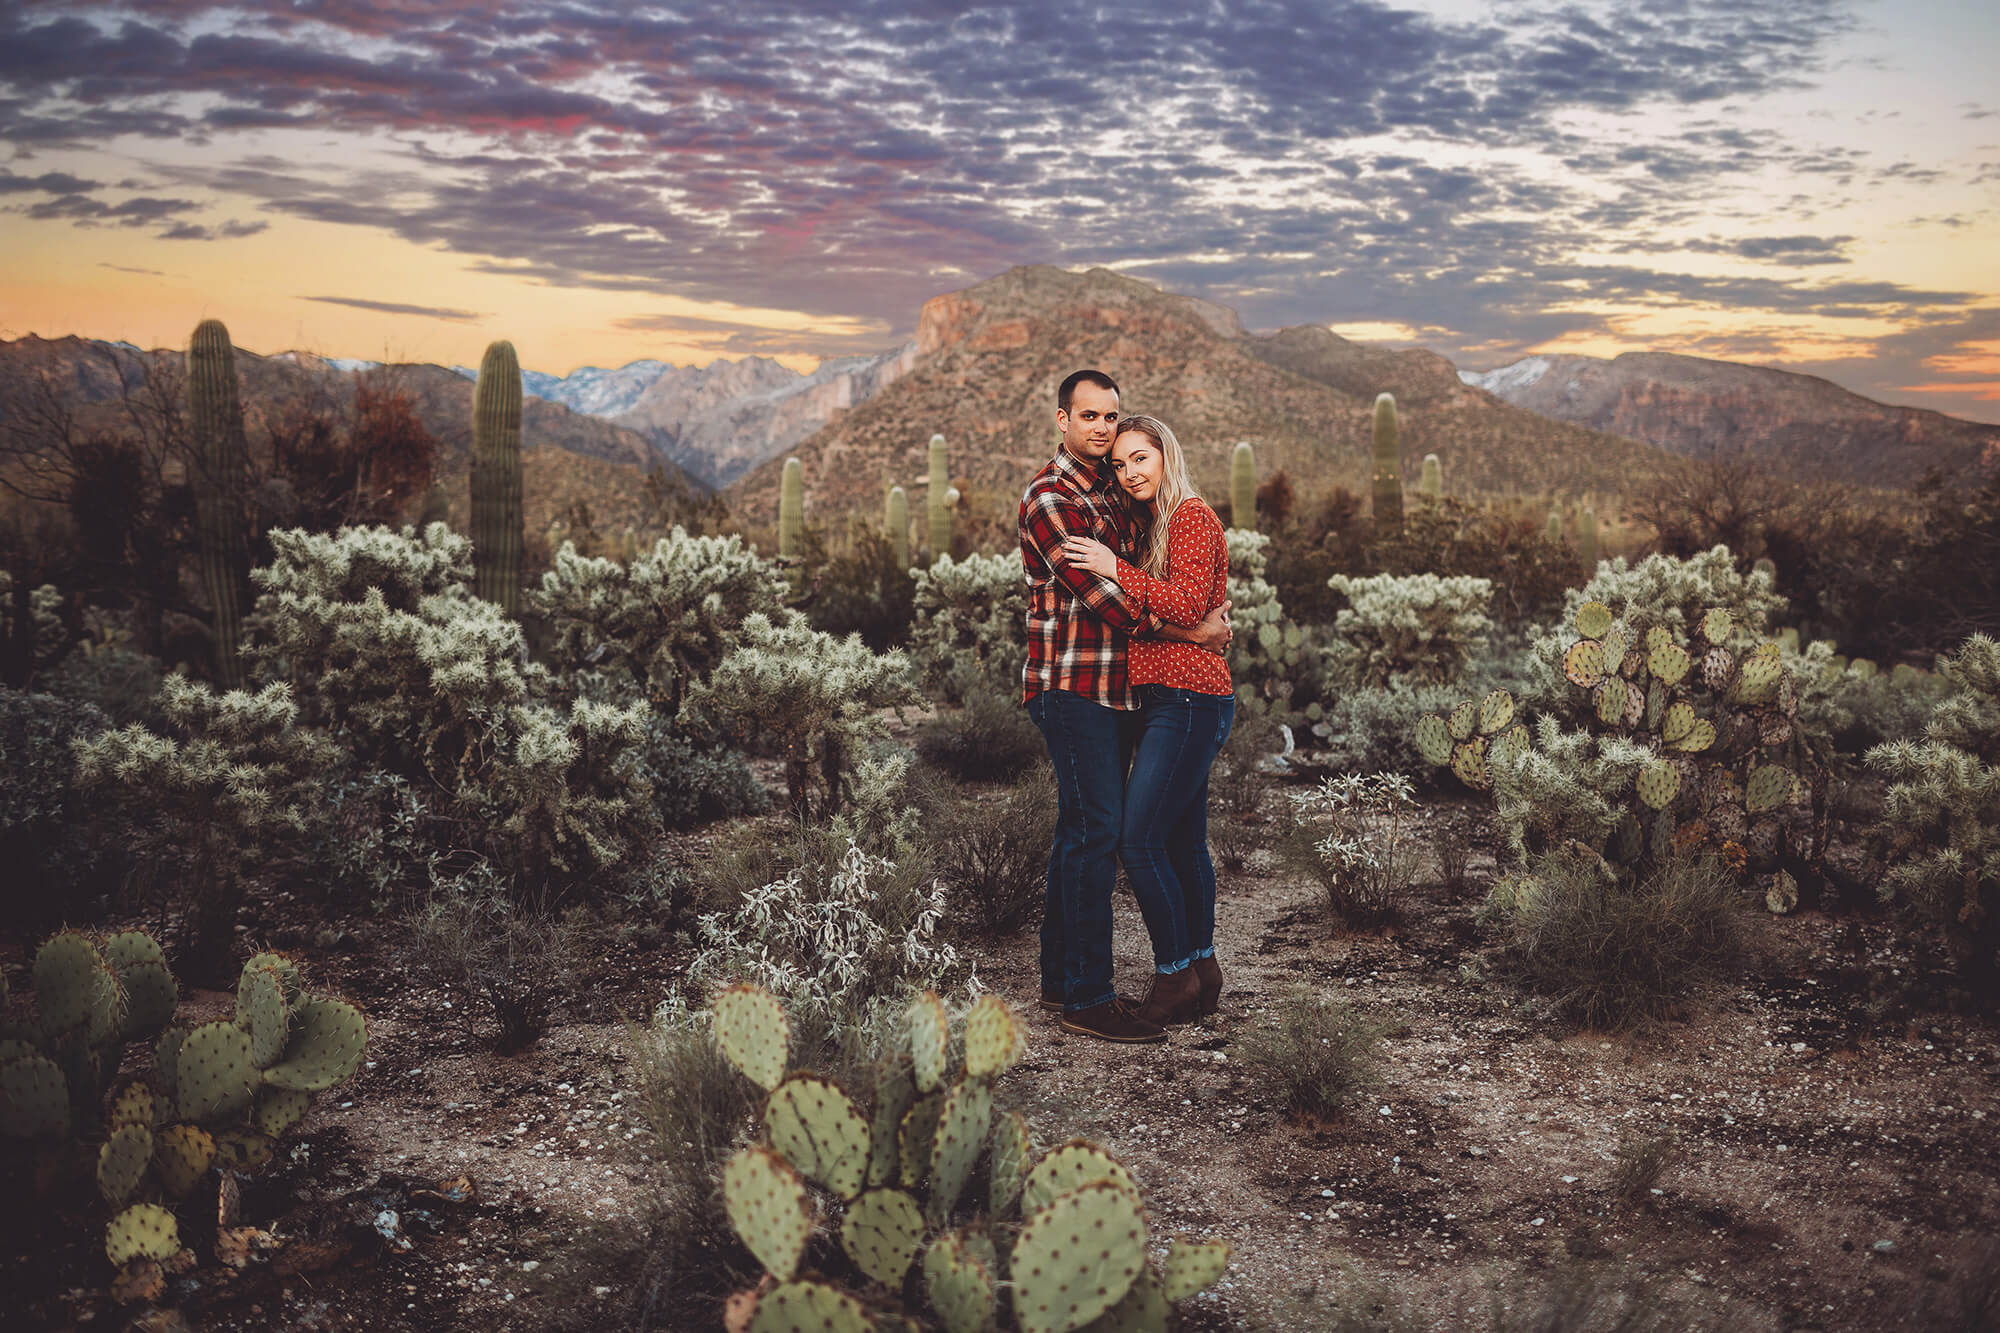 The Freeman's cuddle with the Catalina mountains at their back, a breathtaking sunset above them surrounded by desert fauna